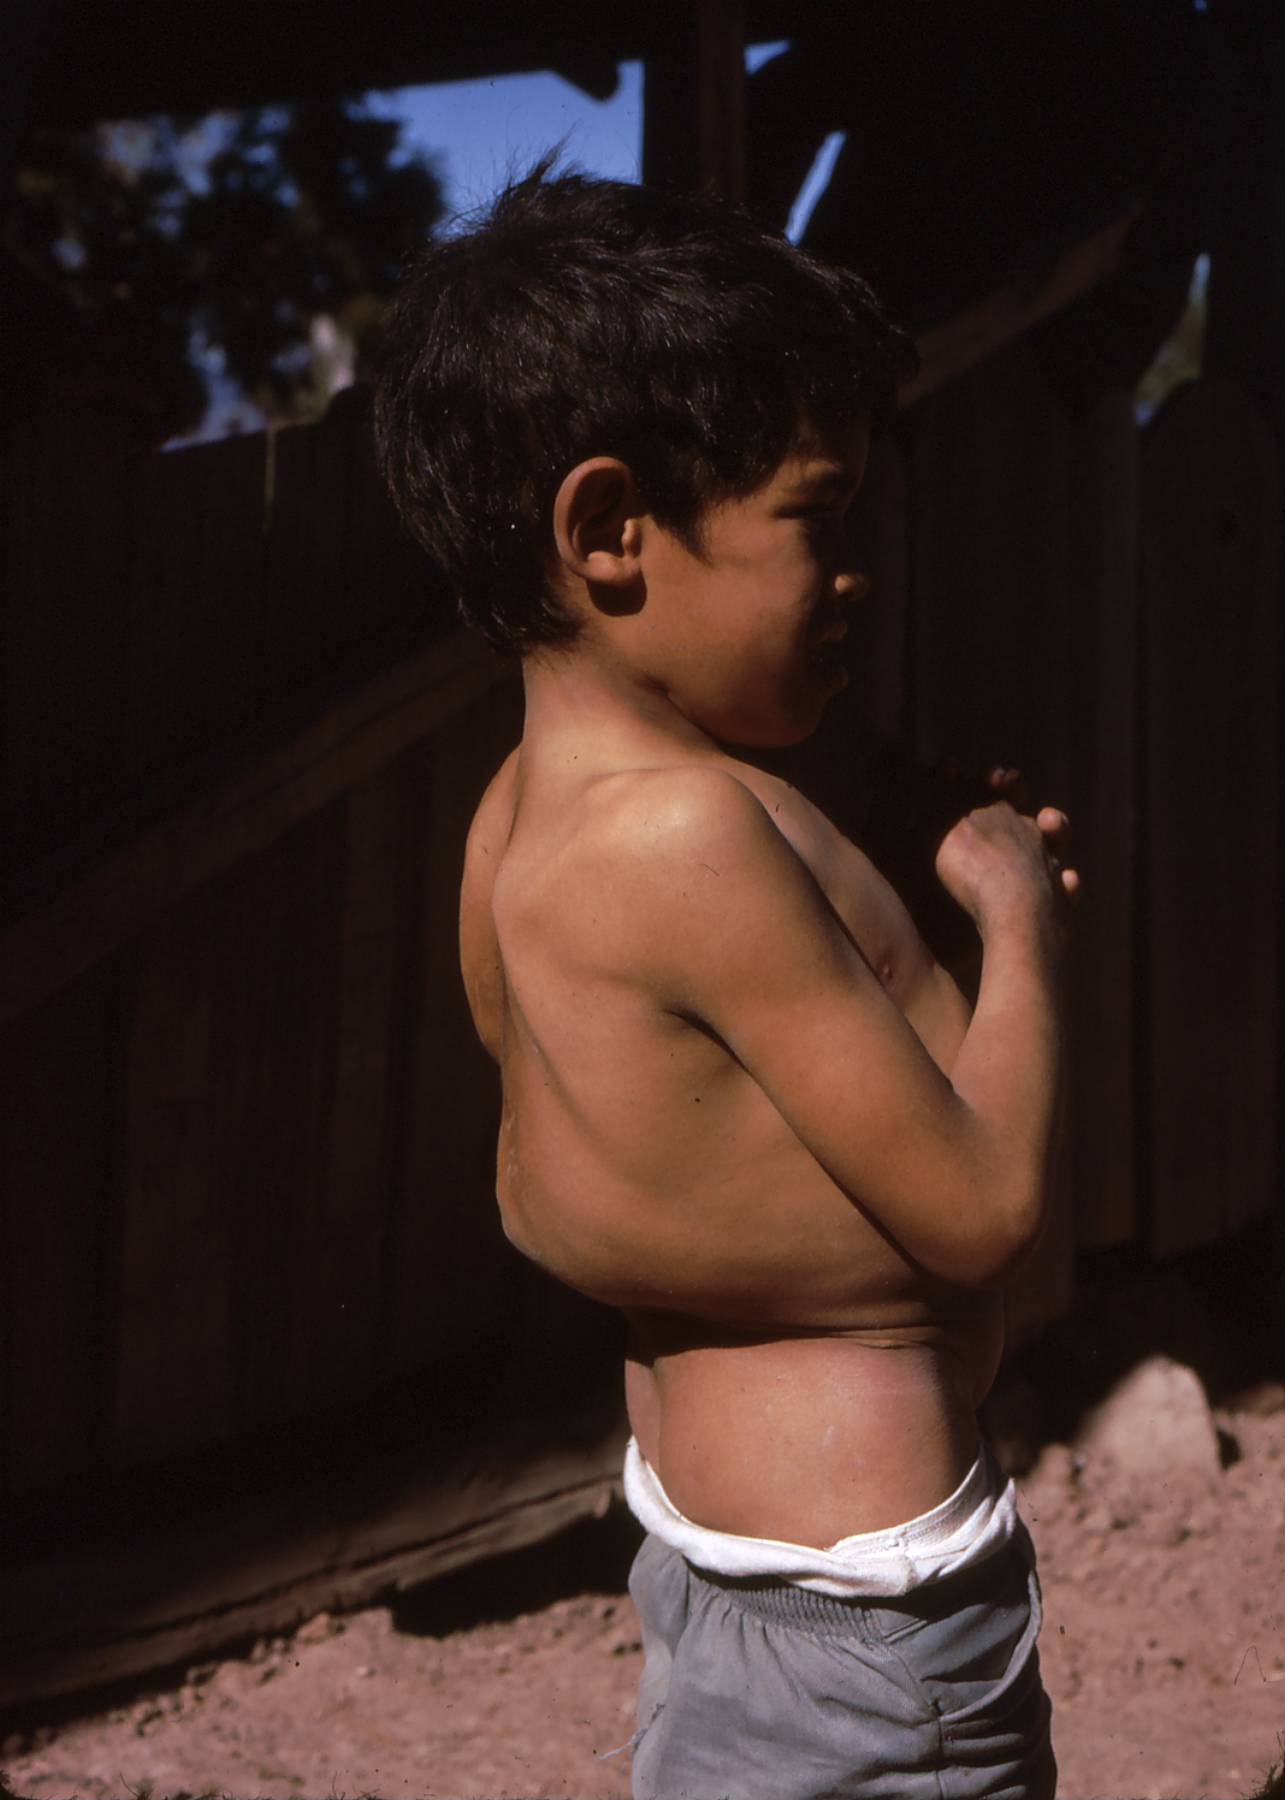 When Project Piaxtla began in the Sierra Madre, tuberculosis was ~~a~~ common, debilitating and often fatal affliction. This boy has Pott's disease, or TB of the spine. Thanks to the vaccination program TB became far less frequent.